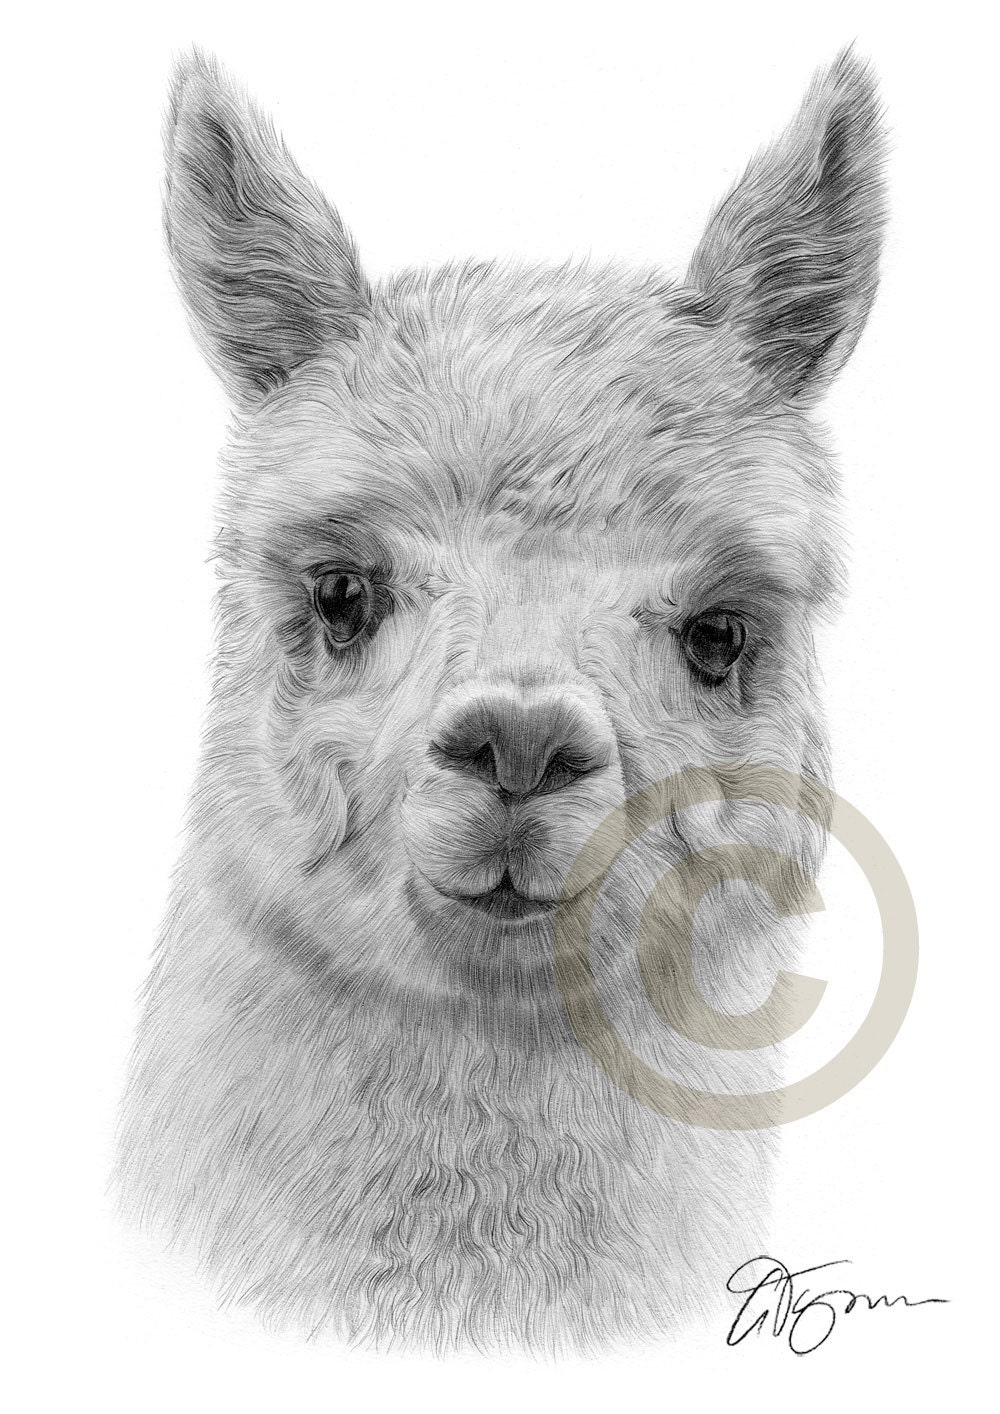 Alpaca pencil drawing print A4 size artwork signed by